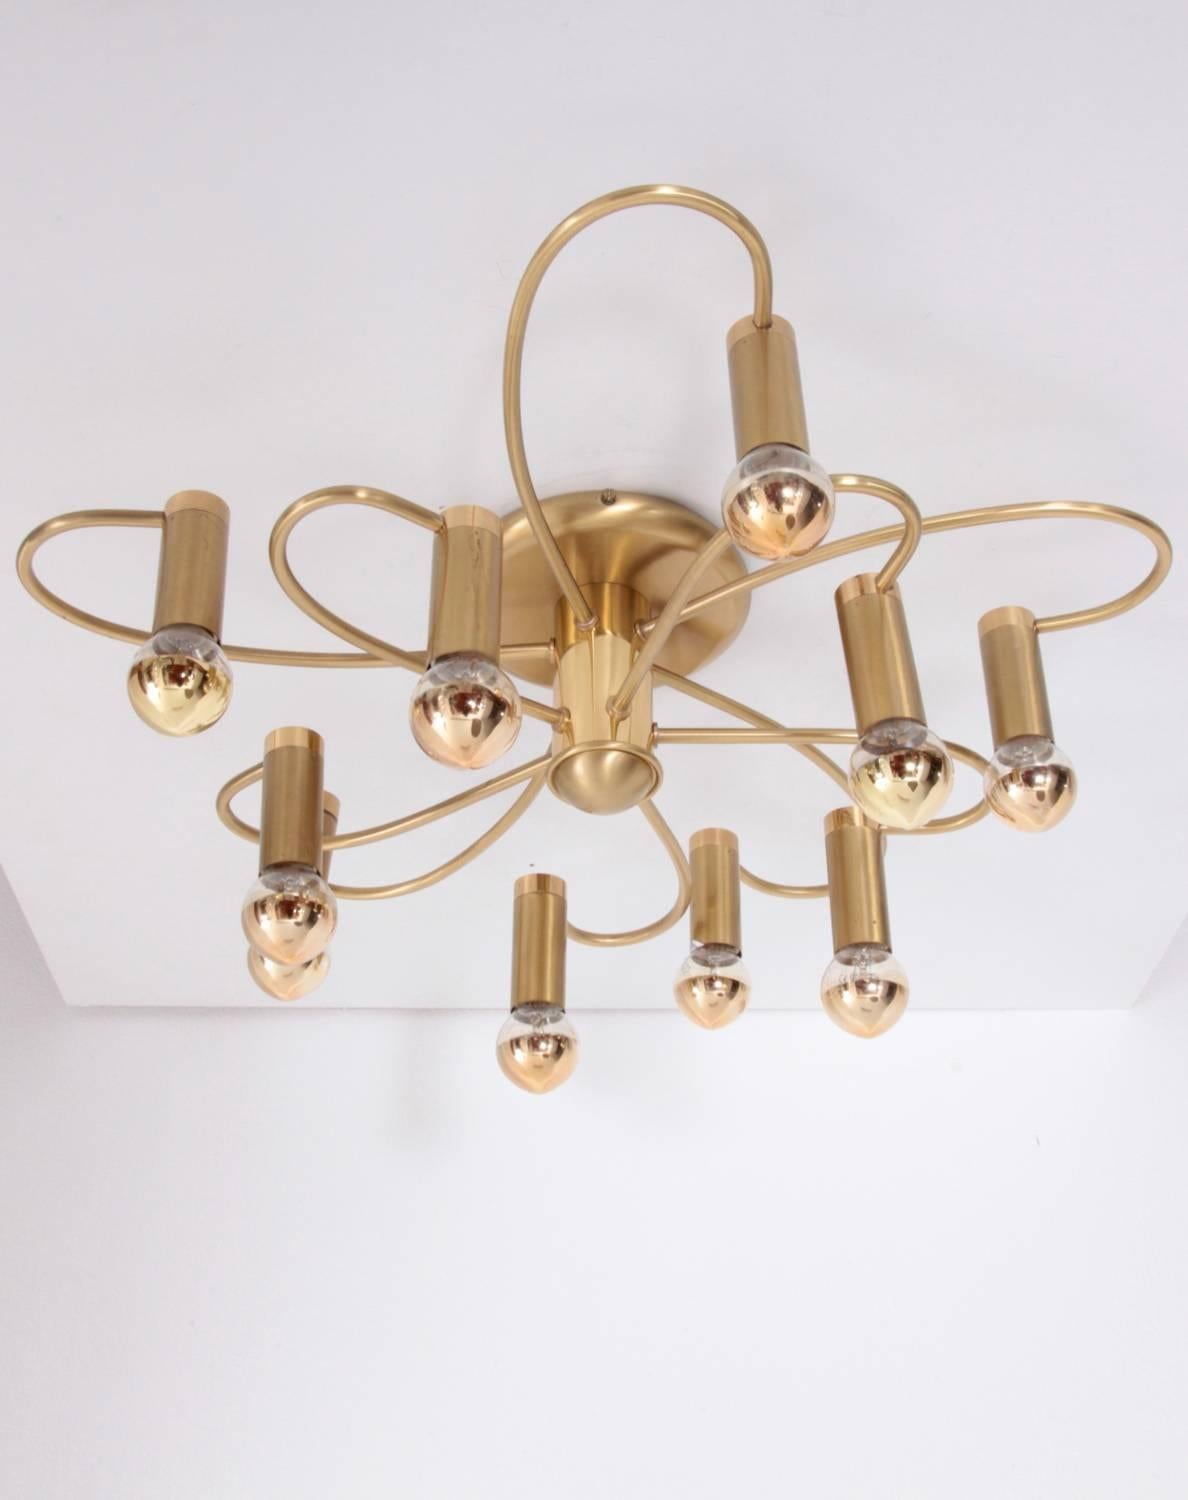 Honsel flush mount brass chandelier with two spiralling tiers. Measures: Ten x E14 bulbs. Excellent condition.
To be on the the safe side, the lamp should be checked locally by a specialist concerning local requirements.


